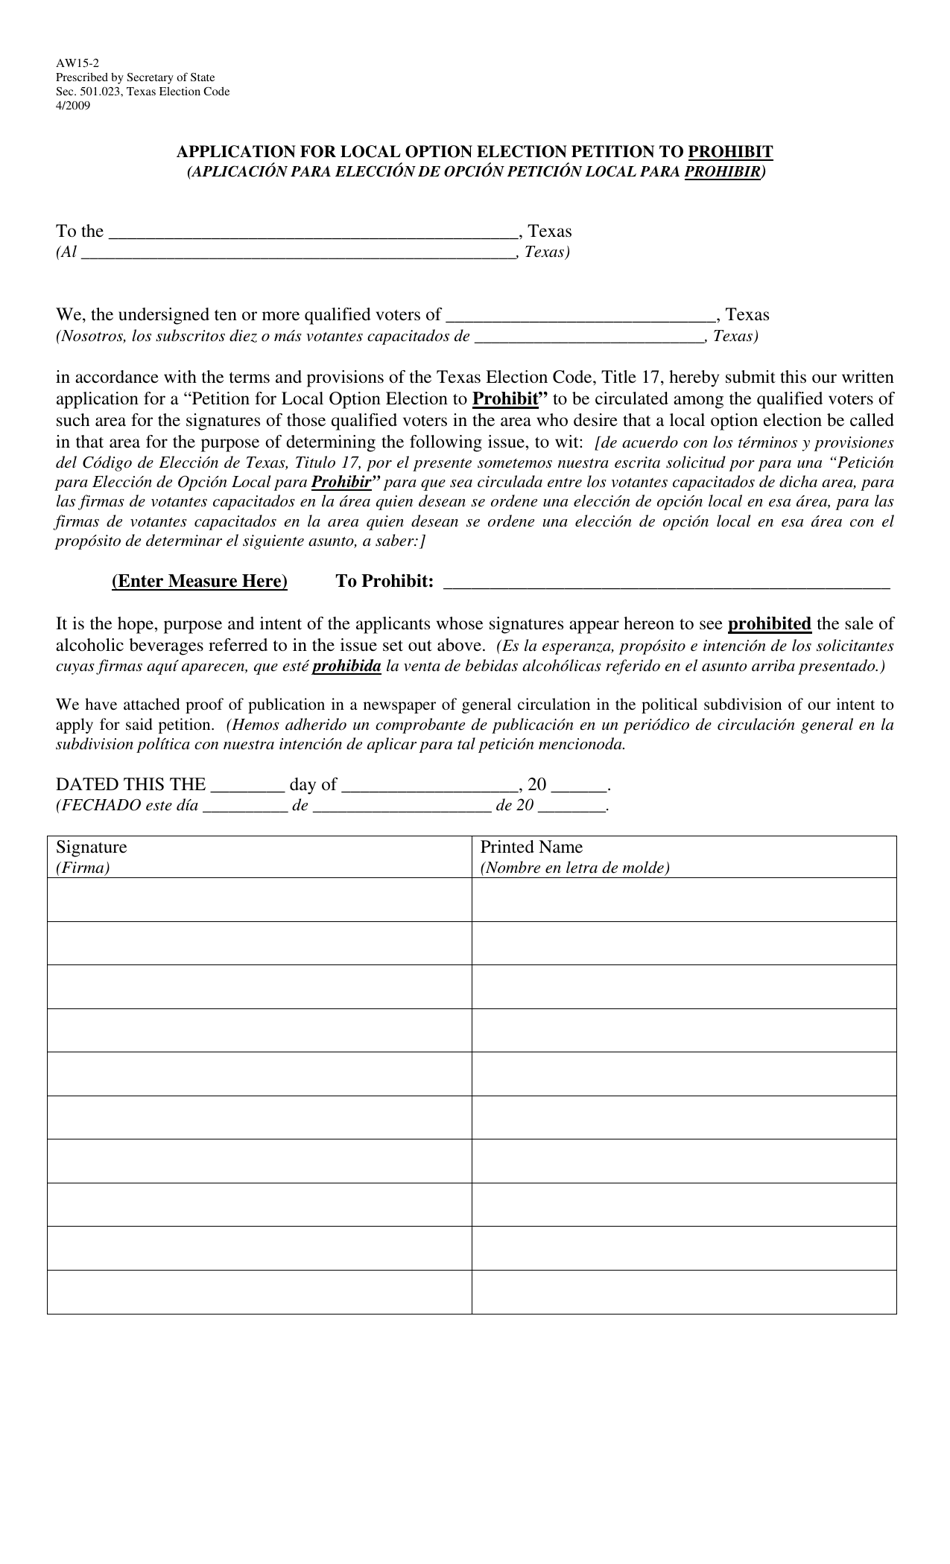 Form AW15-2 Application for Local Option Election Petition to Prohibit - Texas (English / Spanish), Page 1